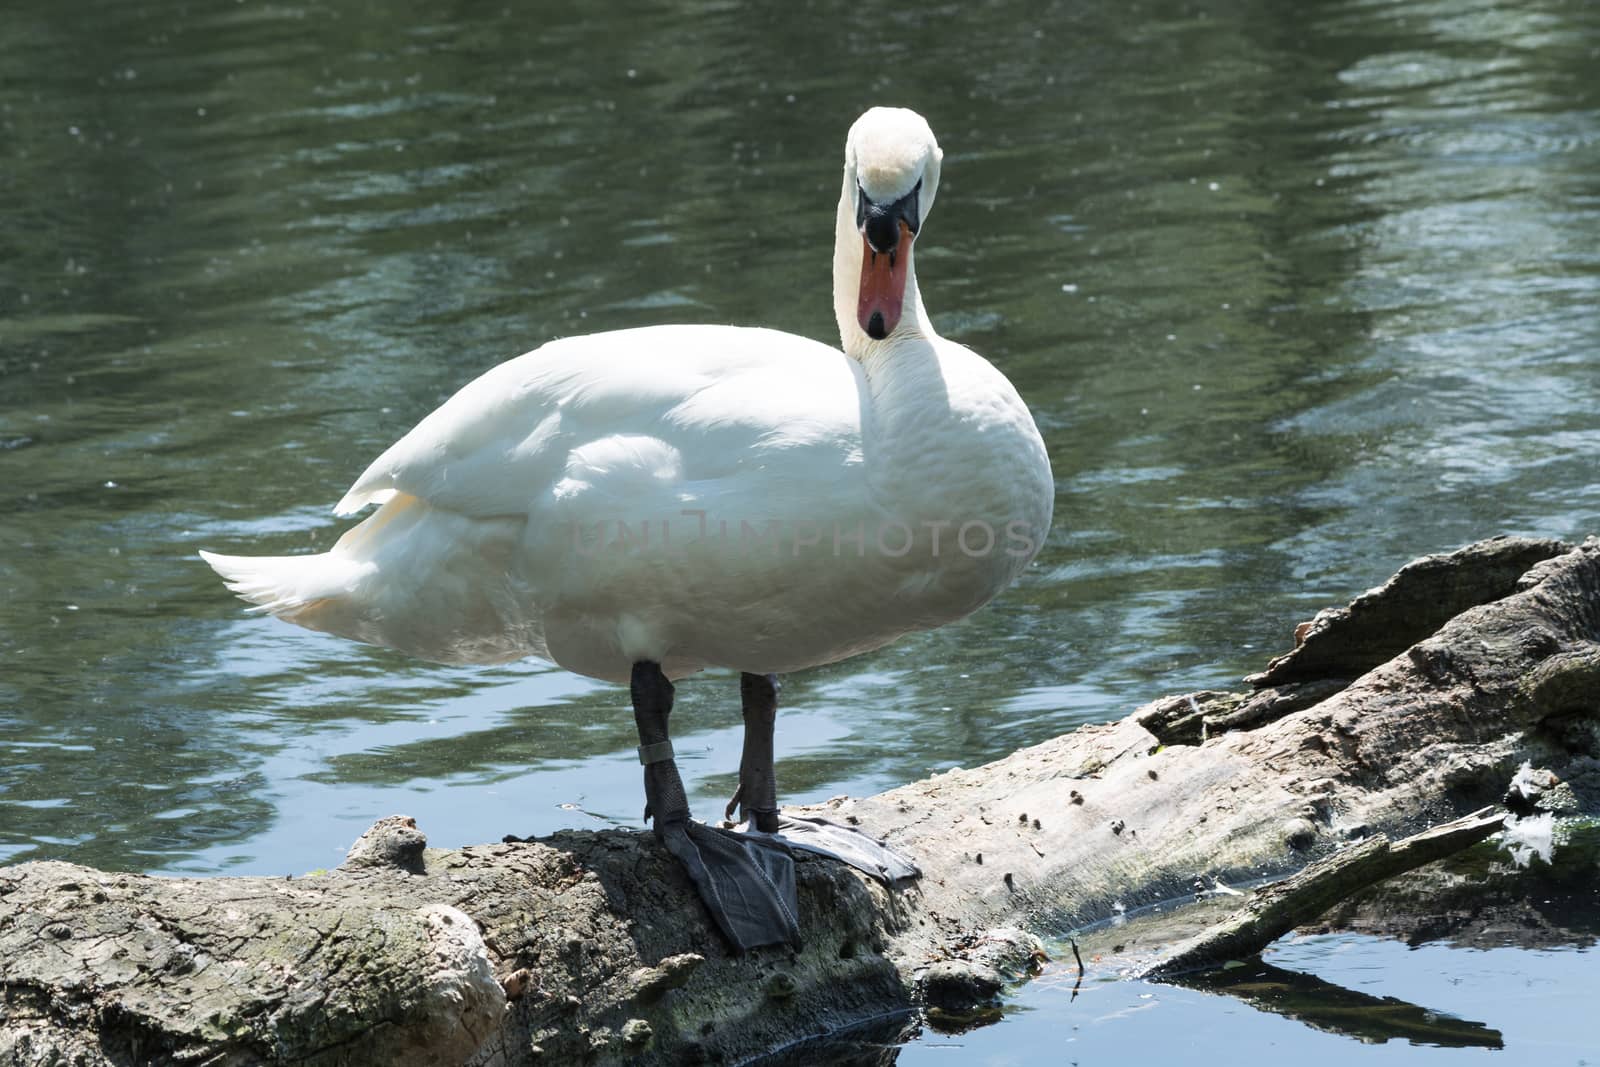 White swan standing on a tree trunk in the lake. by JFsPic